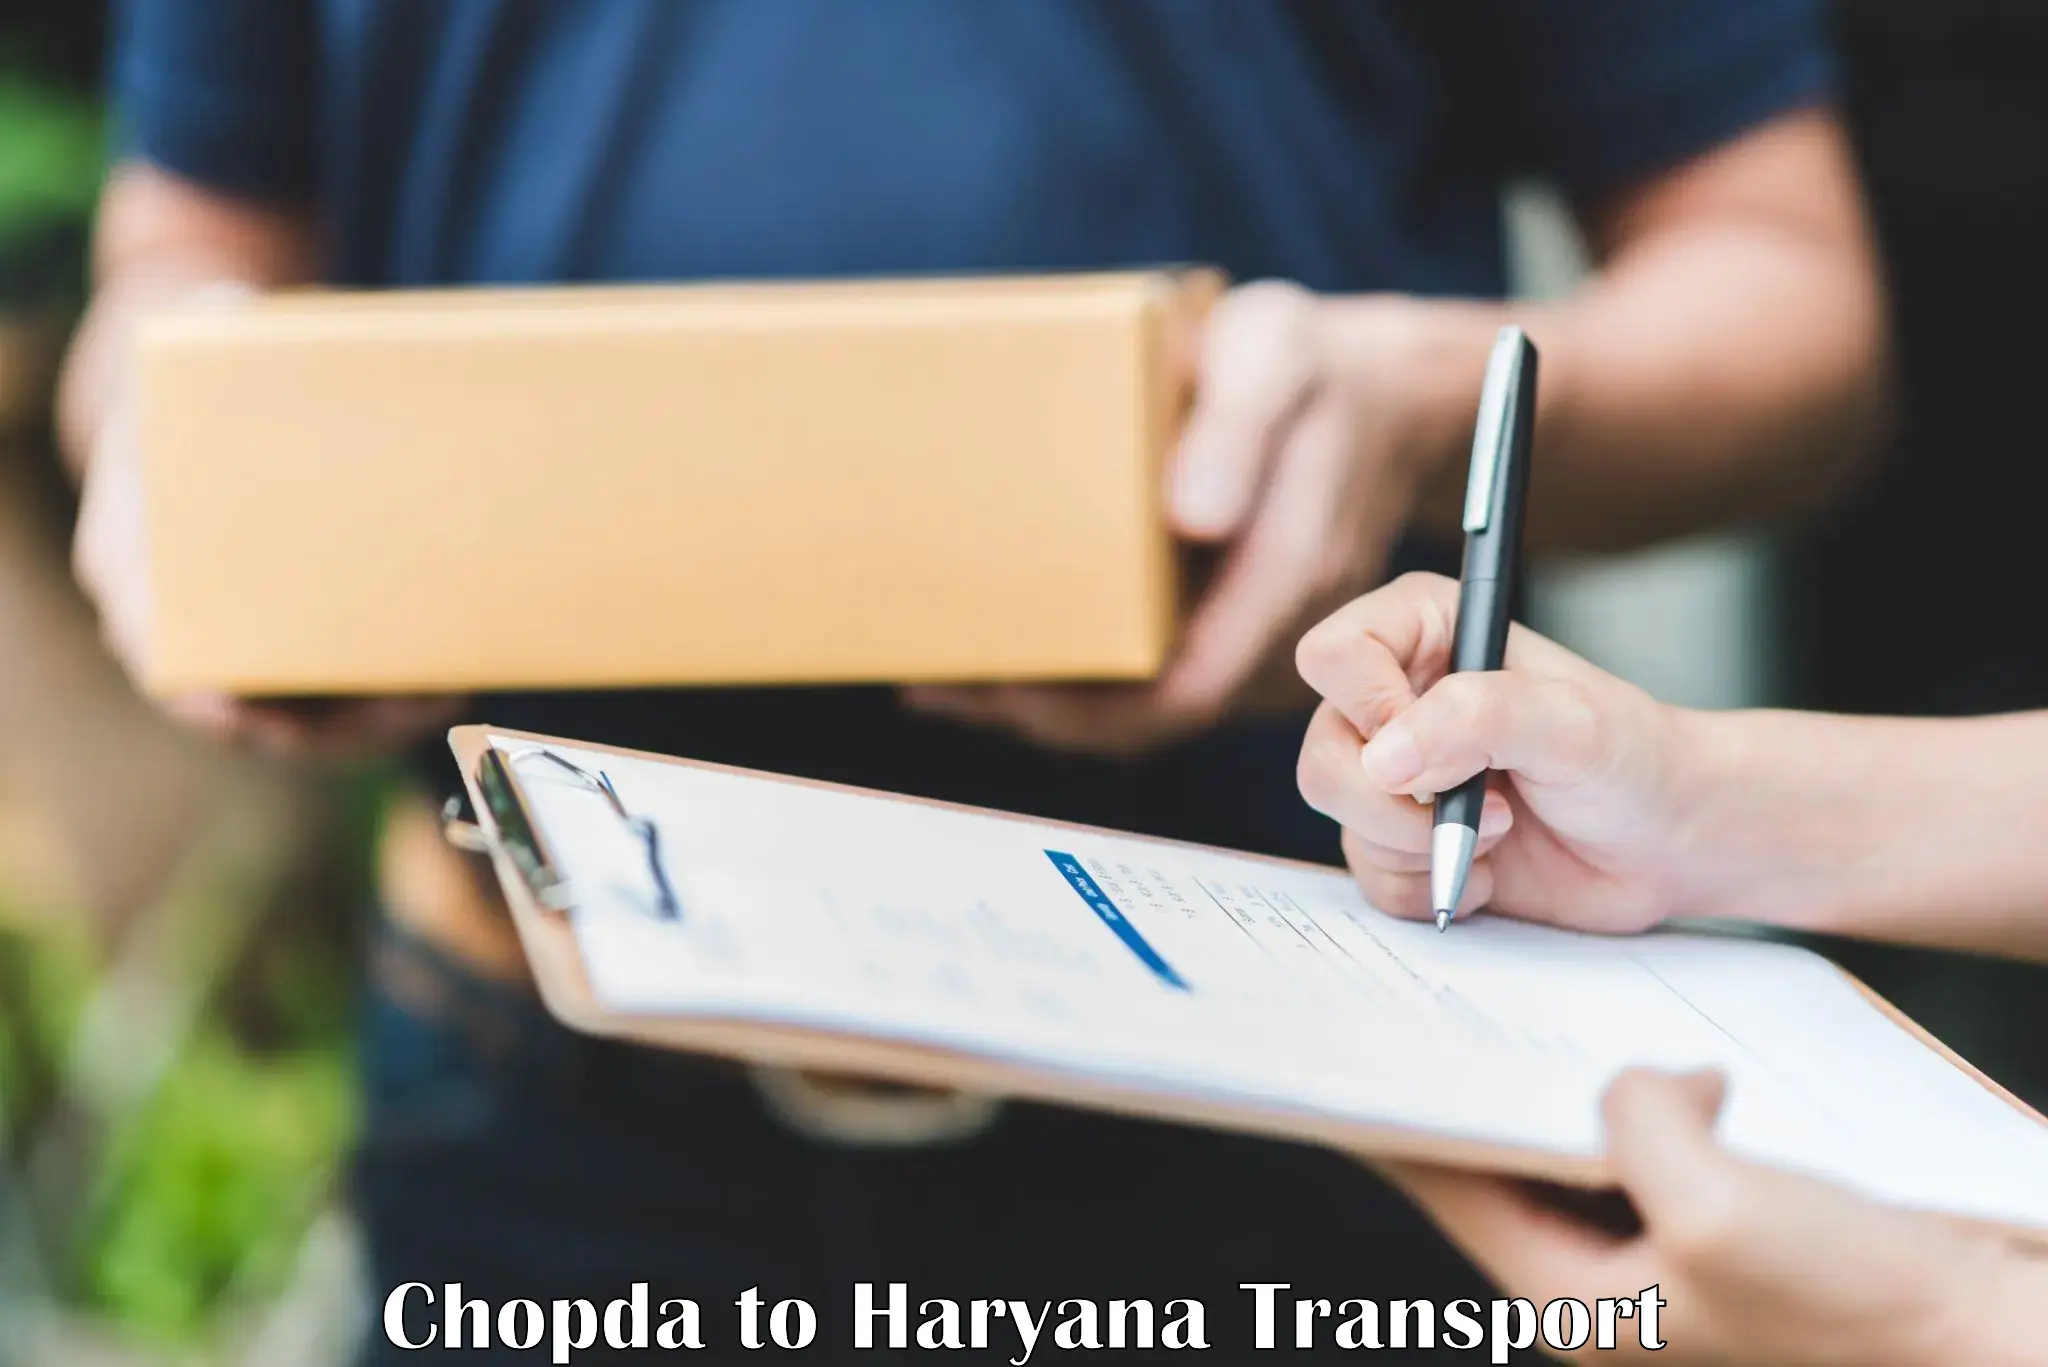 Transport shared services Chopda to Panipat